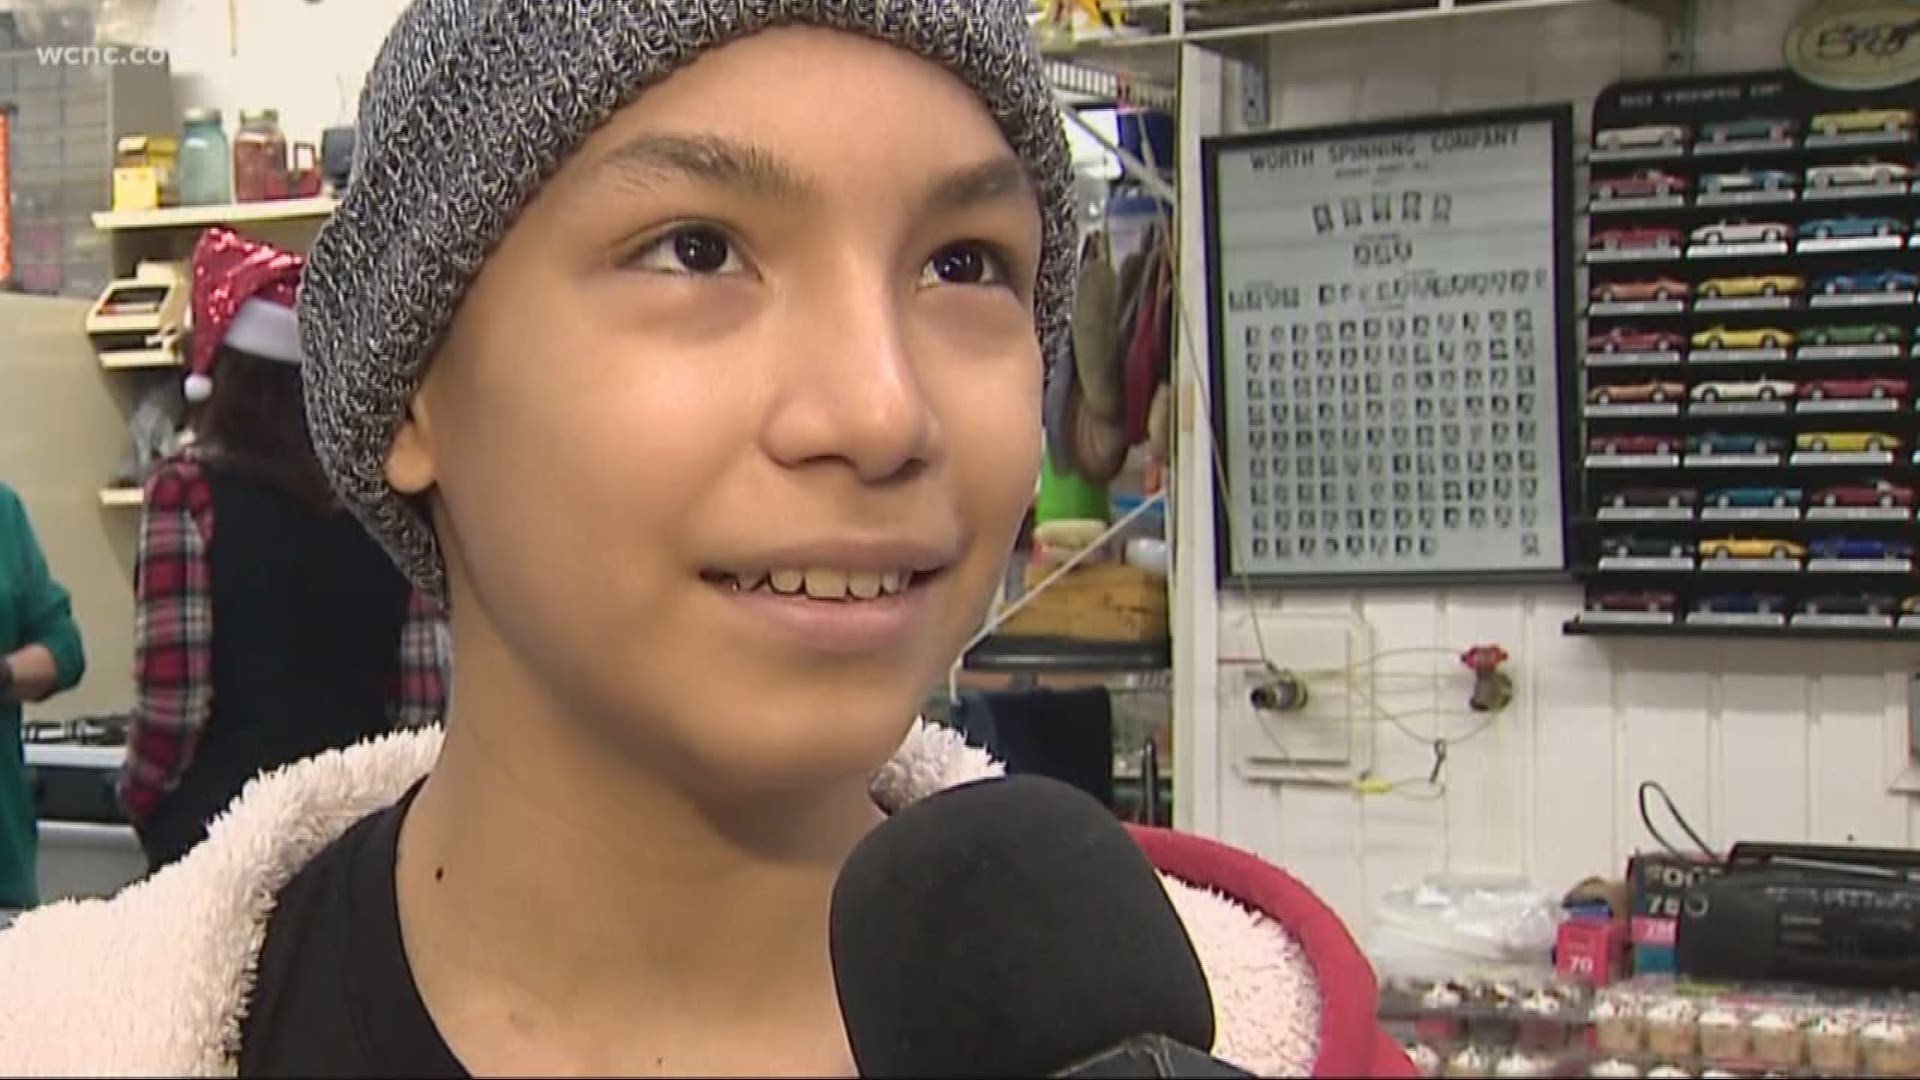 Christmas came early for a boy battling a rare and aggressive form of cancer.